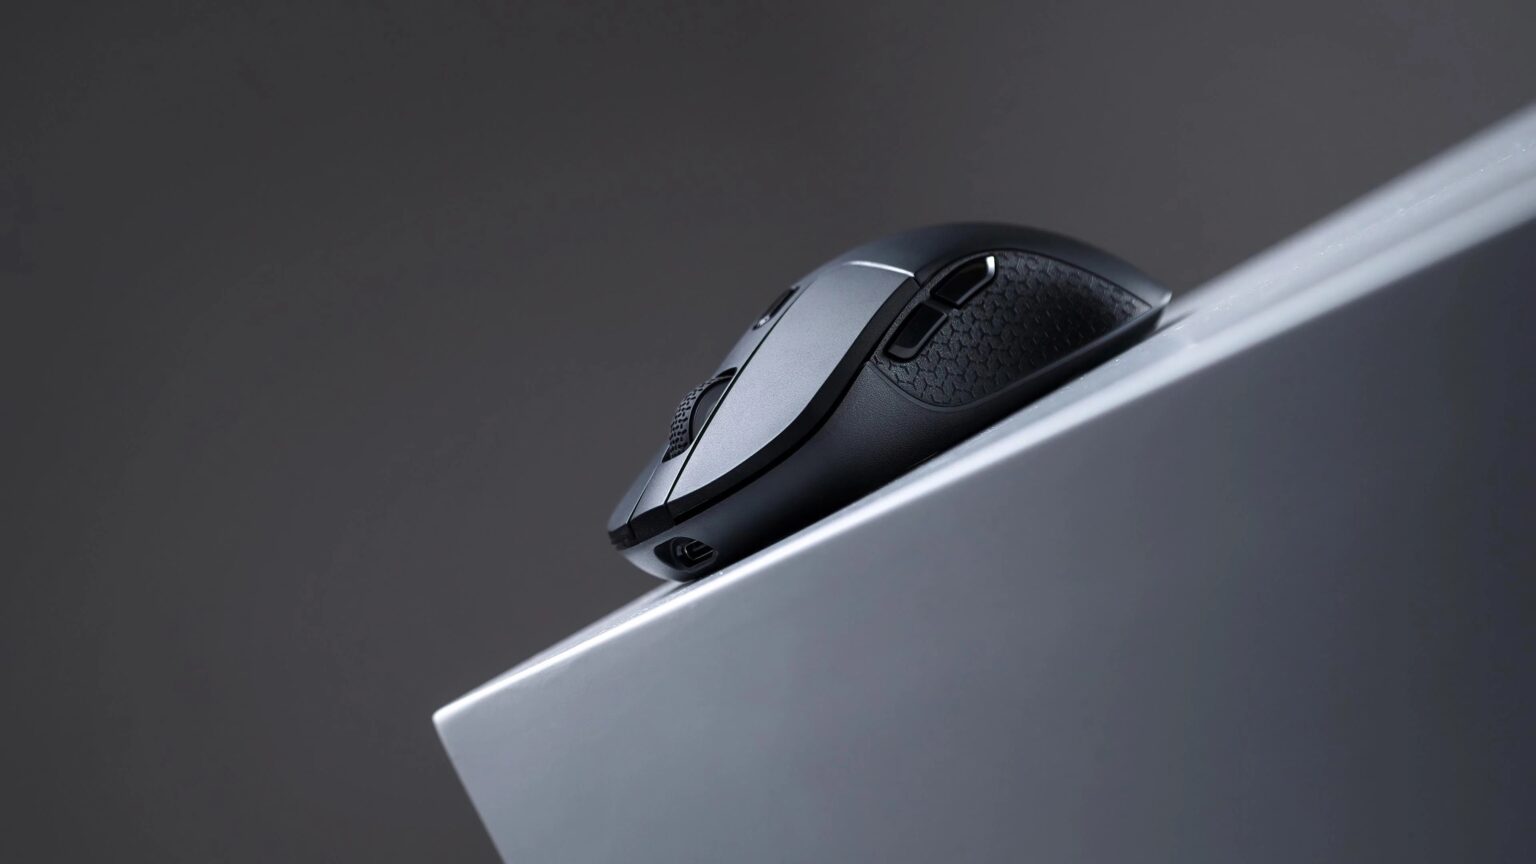 Keychron's new M3 wireless mouse weighs just 79 grams.